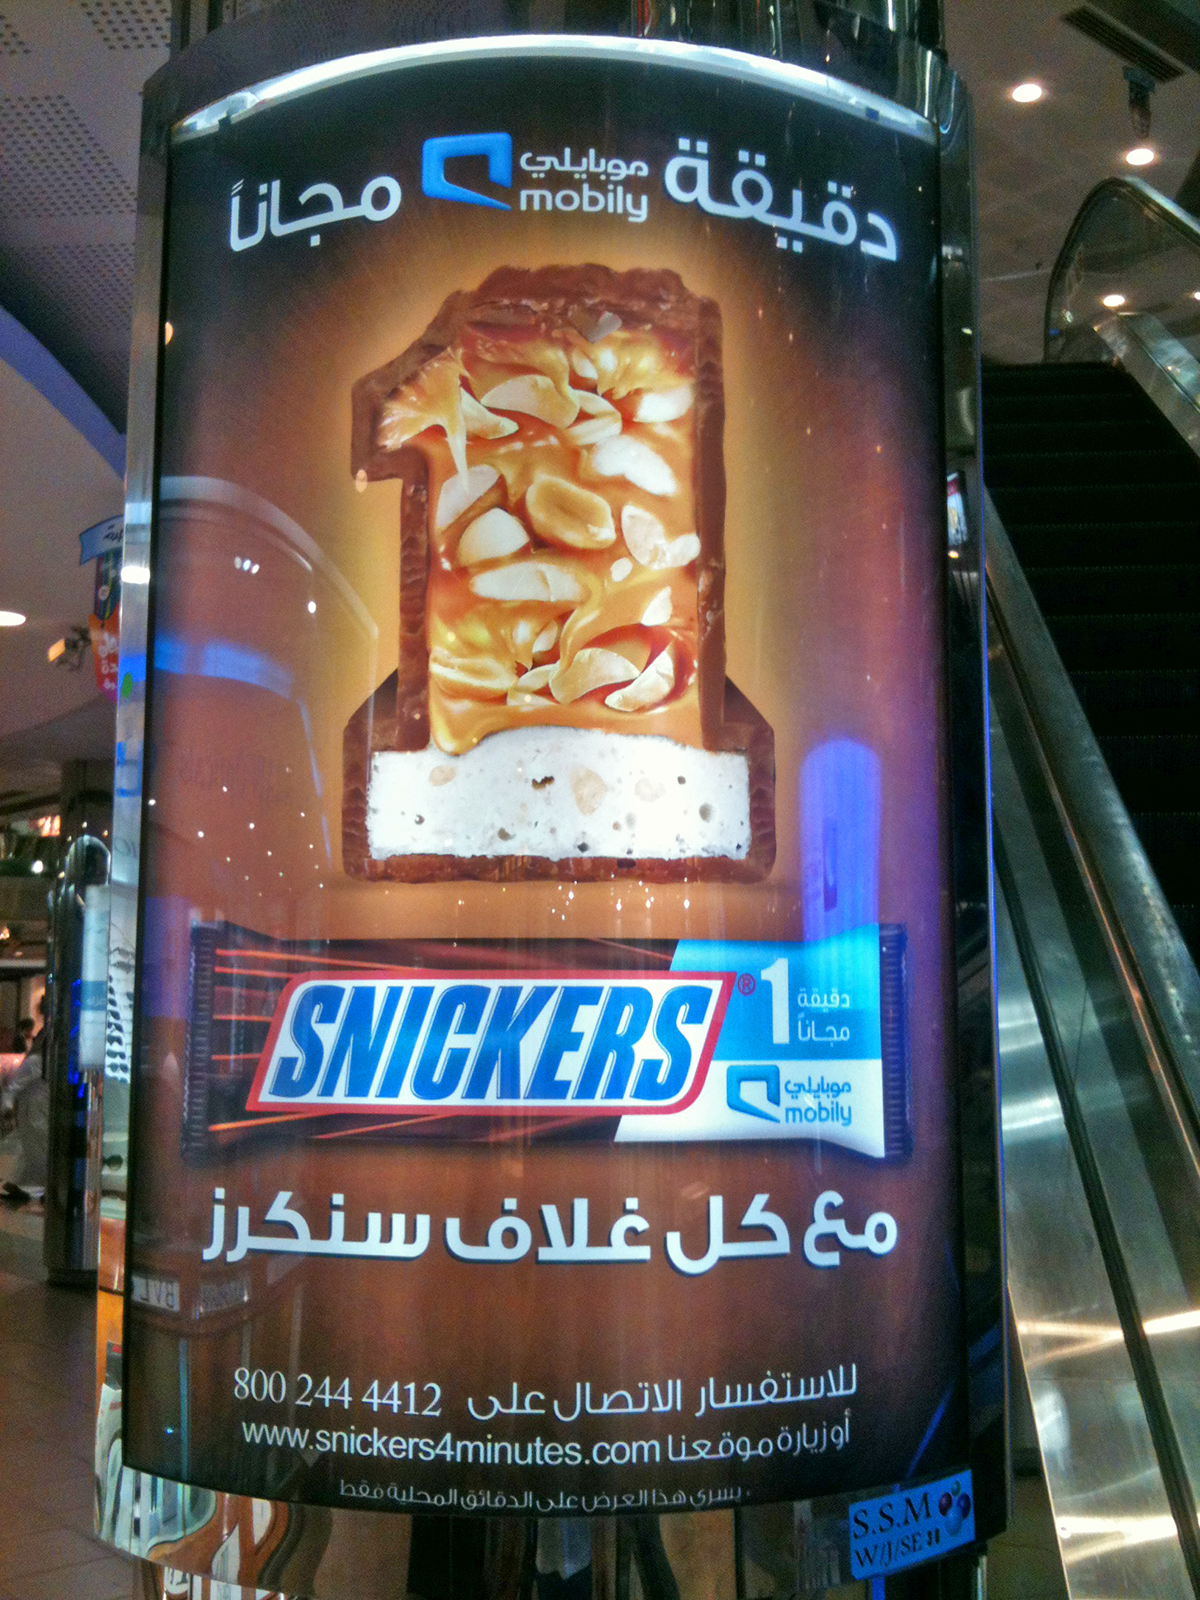 Snickers mobily Snickers mobily one minute one minute